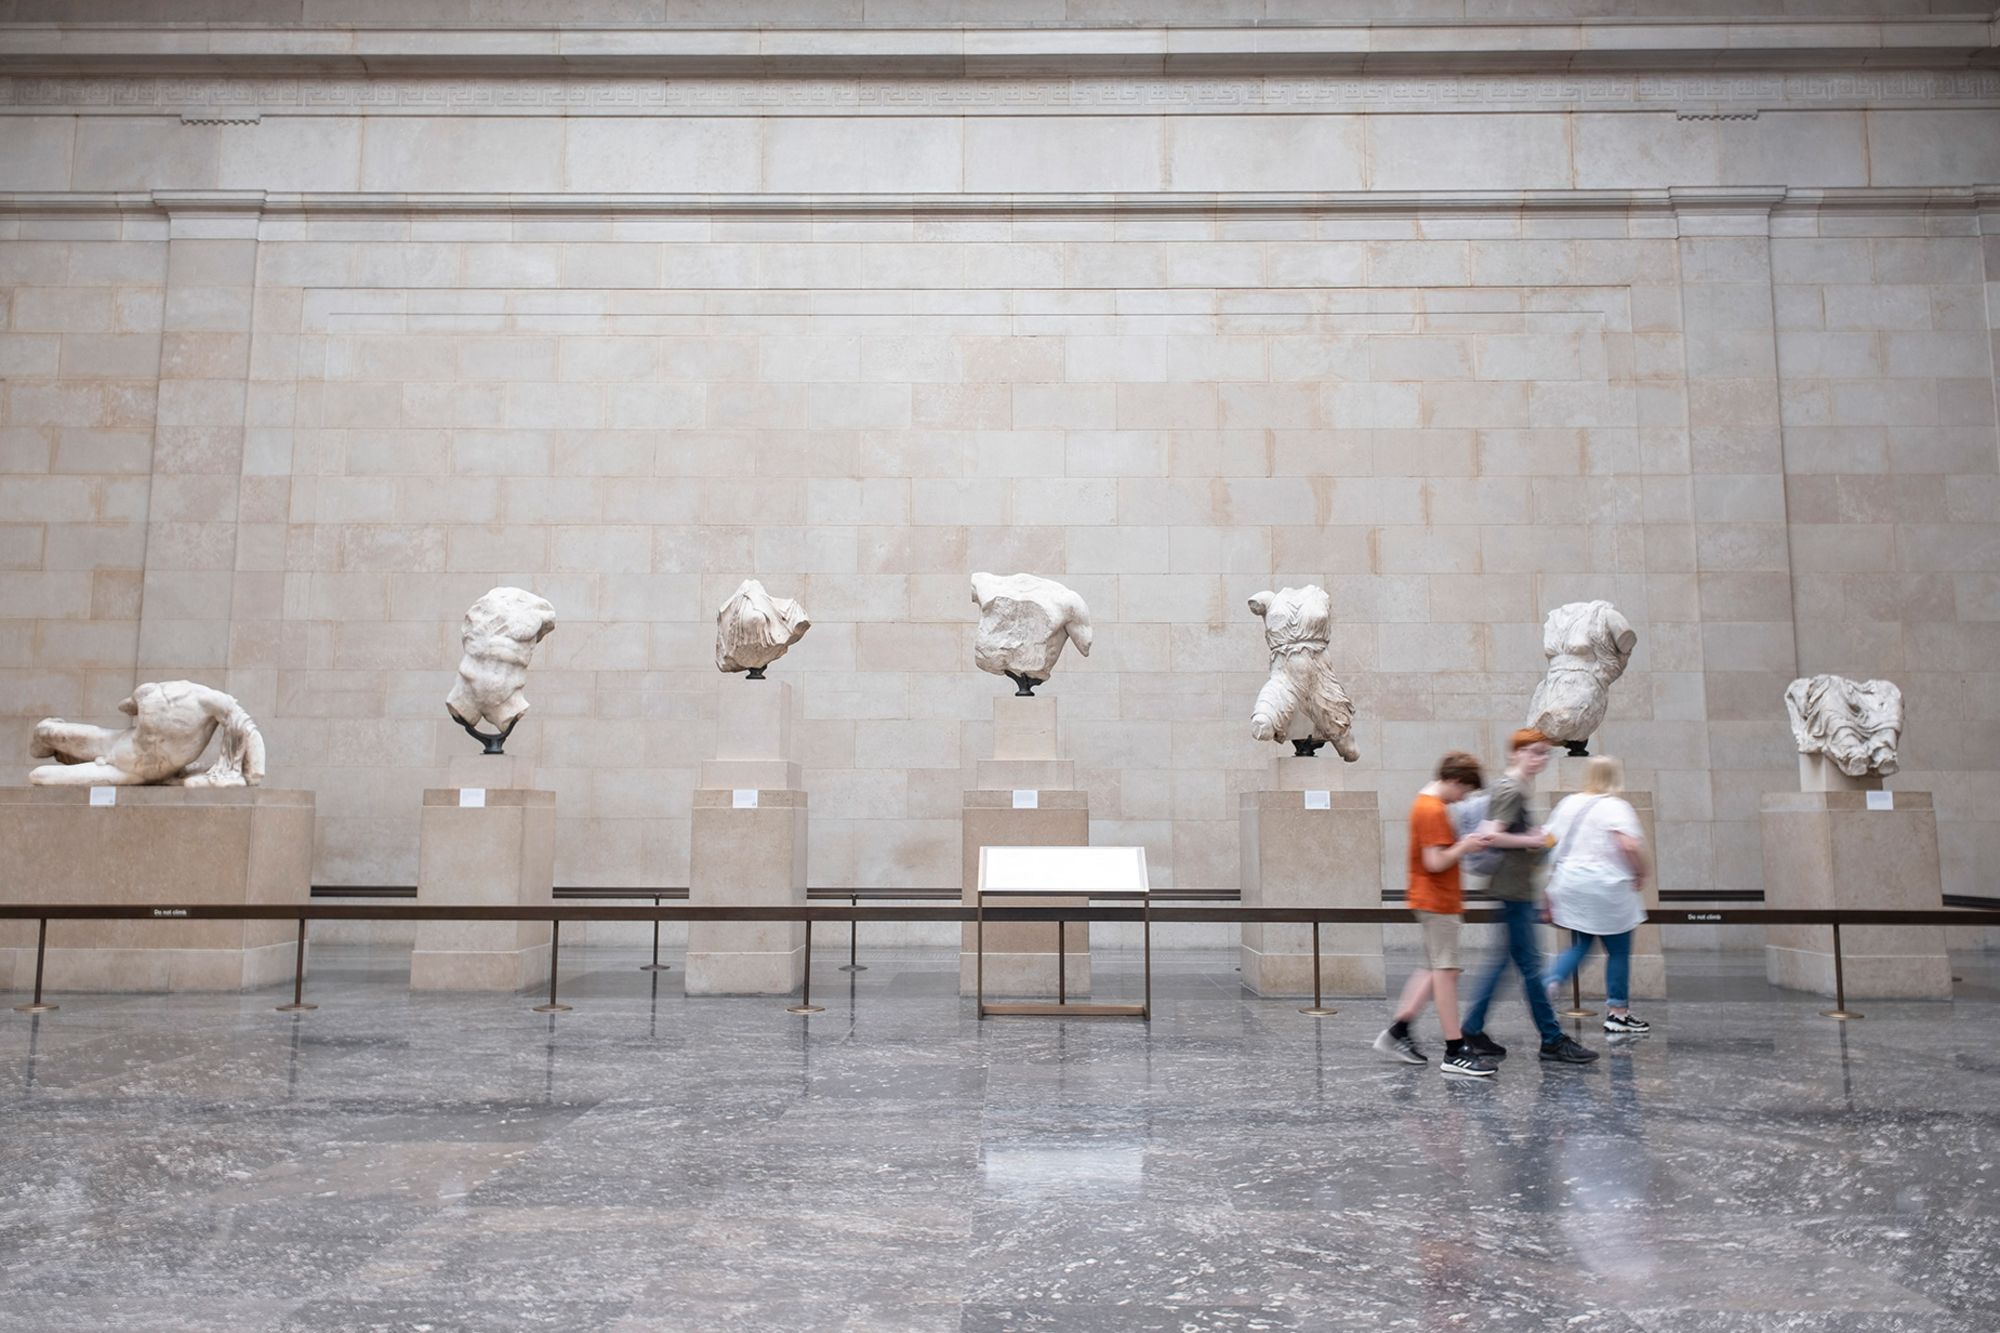 Parthenon Greek Prime Minister Kyriakos Mitsotakis has said his stance on the Parthenon Sculptures (some of which are pictured above in the British Museum) was "well-known."